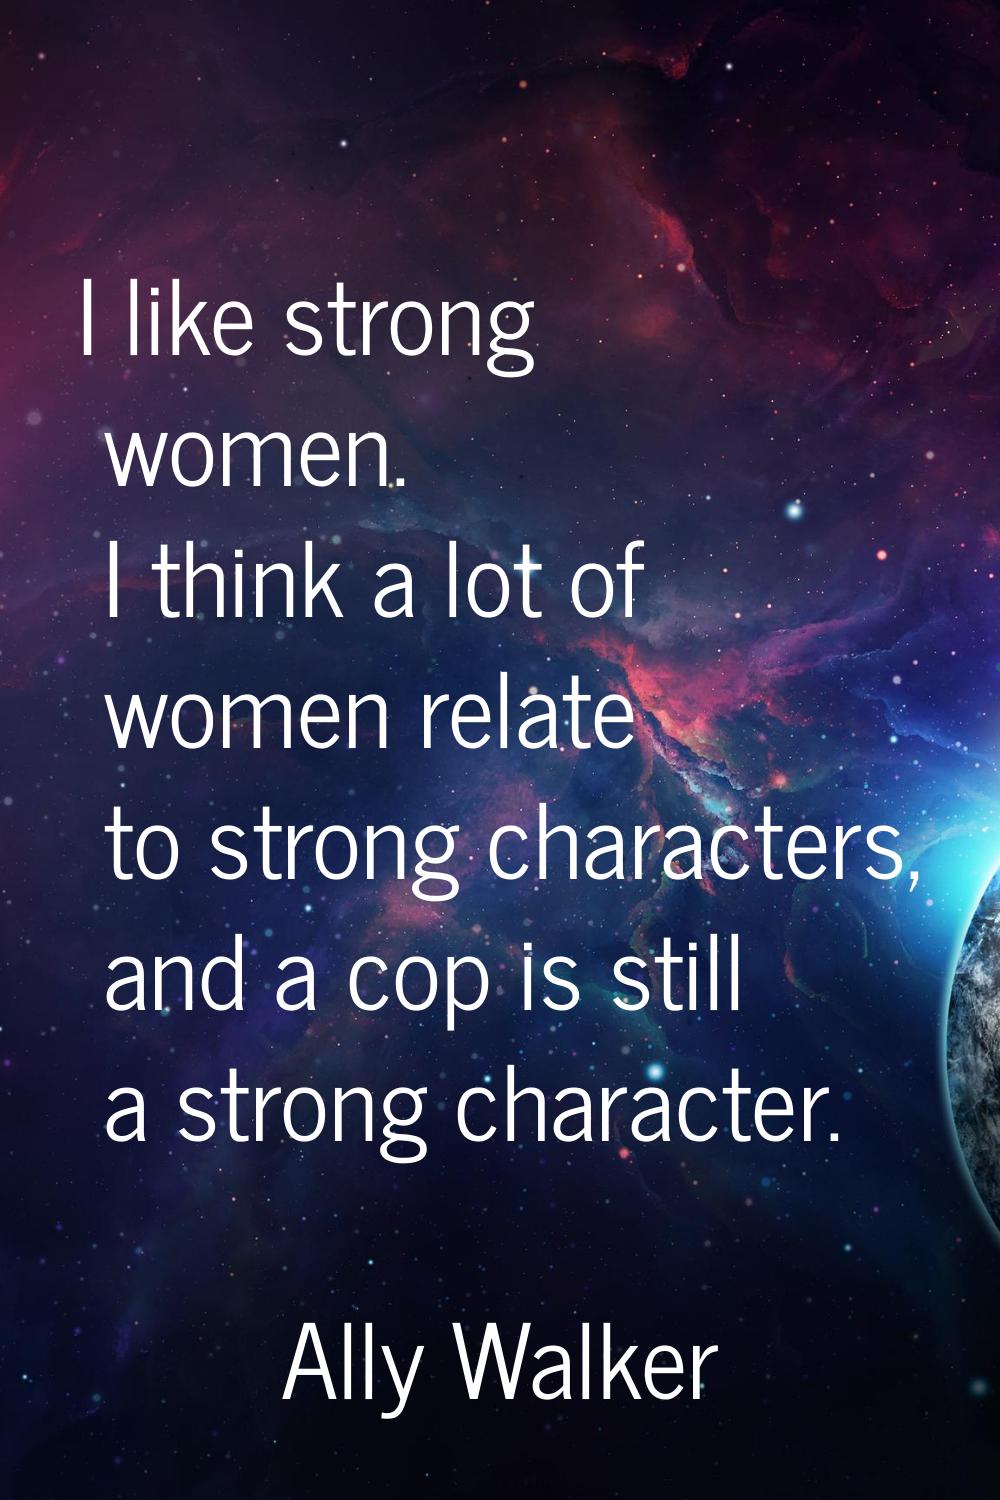 I like strong women. I think a lot of women relate to strong characters, and a cop is still a stron